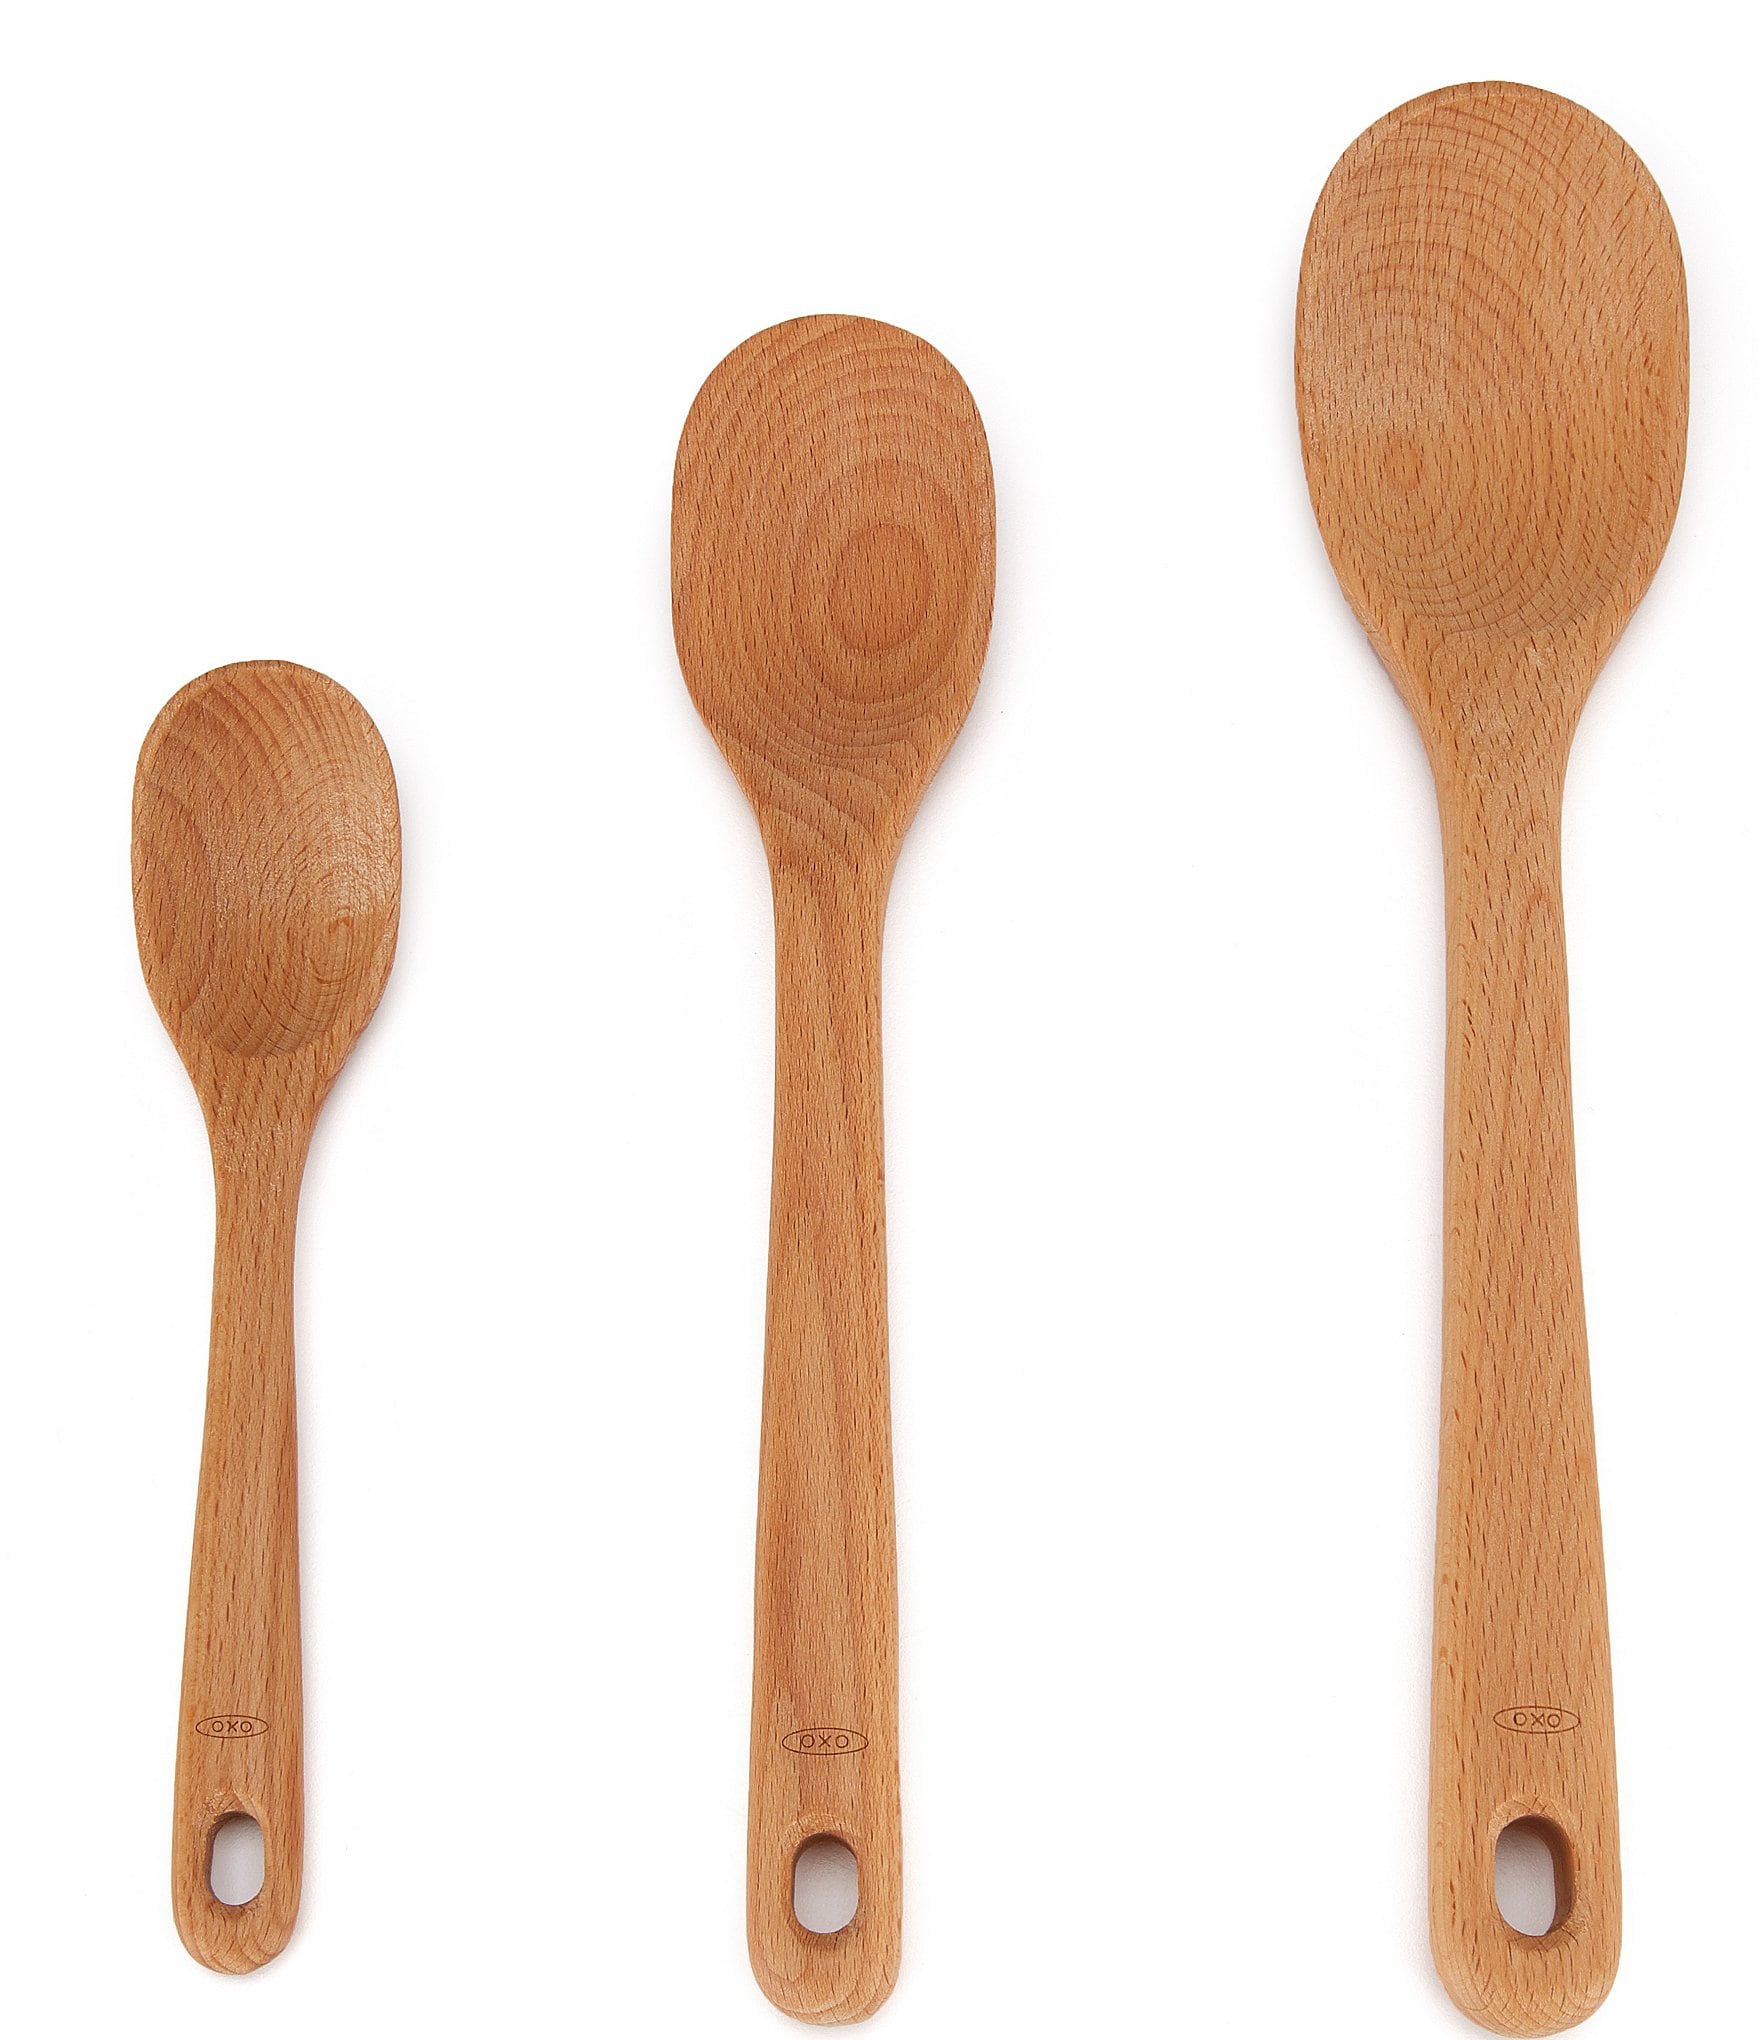 OXO Good Grips® 3-pc. Wooden Spoon Set-JCPenney, Color: Tan